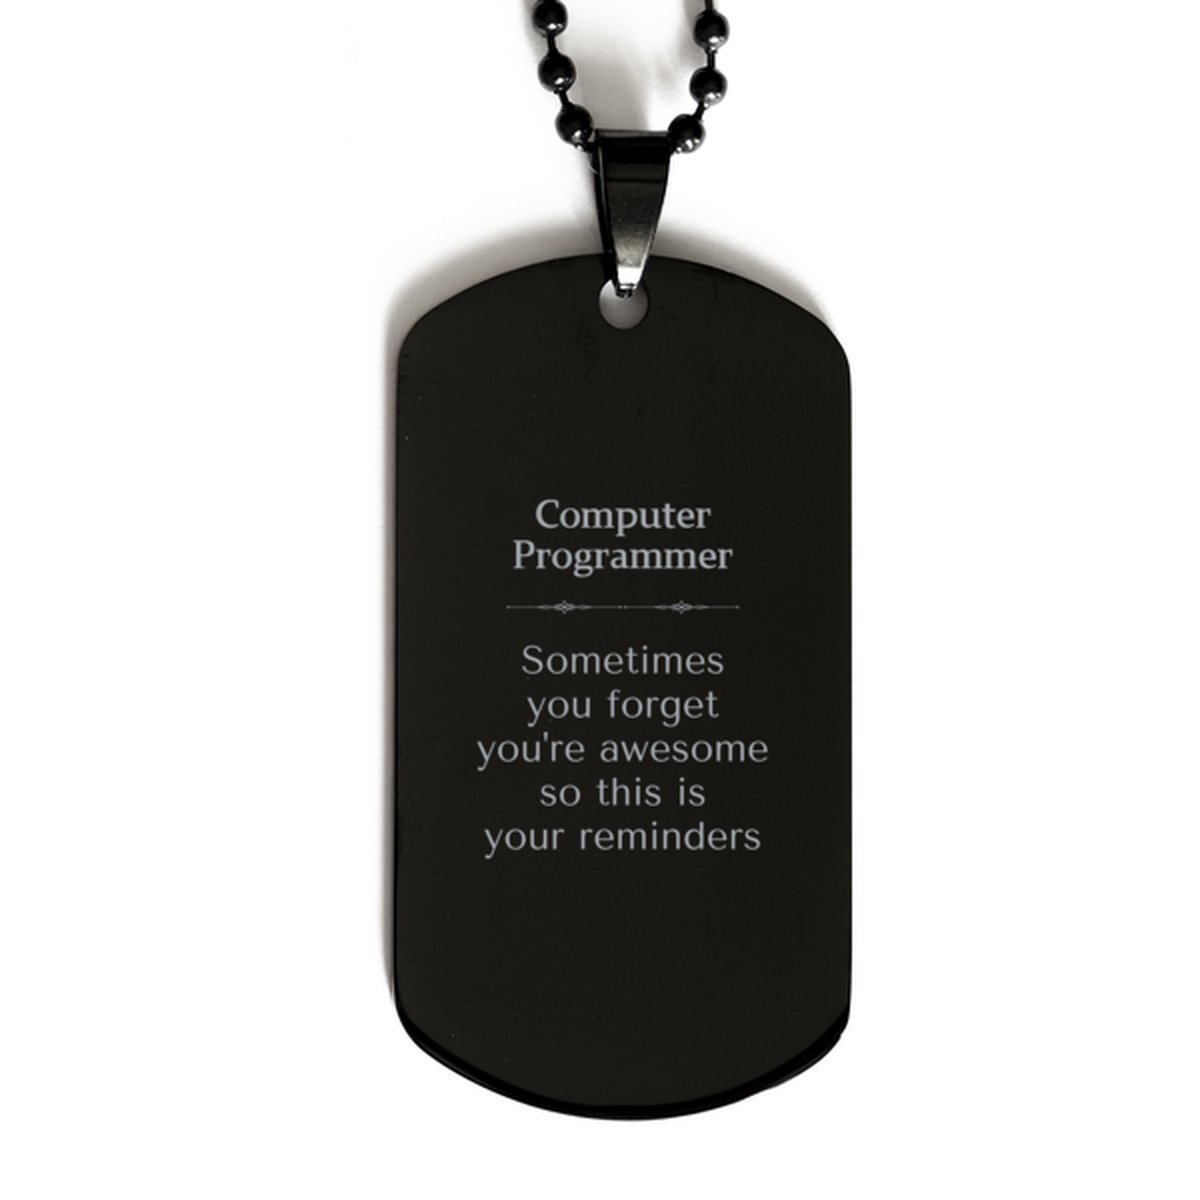 Sentimental Computer Programmer Black Dog Tag, Computer Programmer Sometimes you forget you're awesome so this is your reminders, Graduation Christmas Birthday Gifts for Computer Programmer, Men, Women, Coworkers